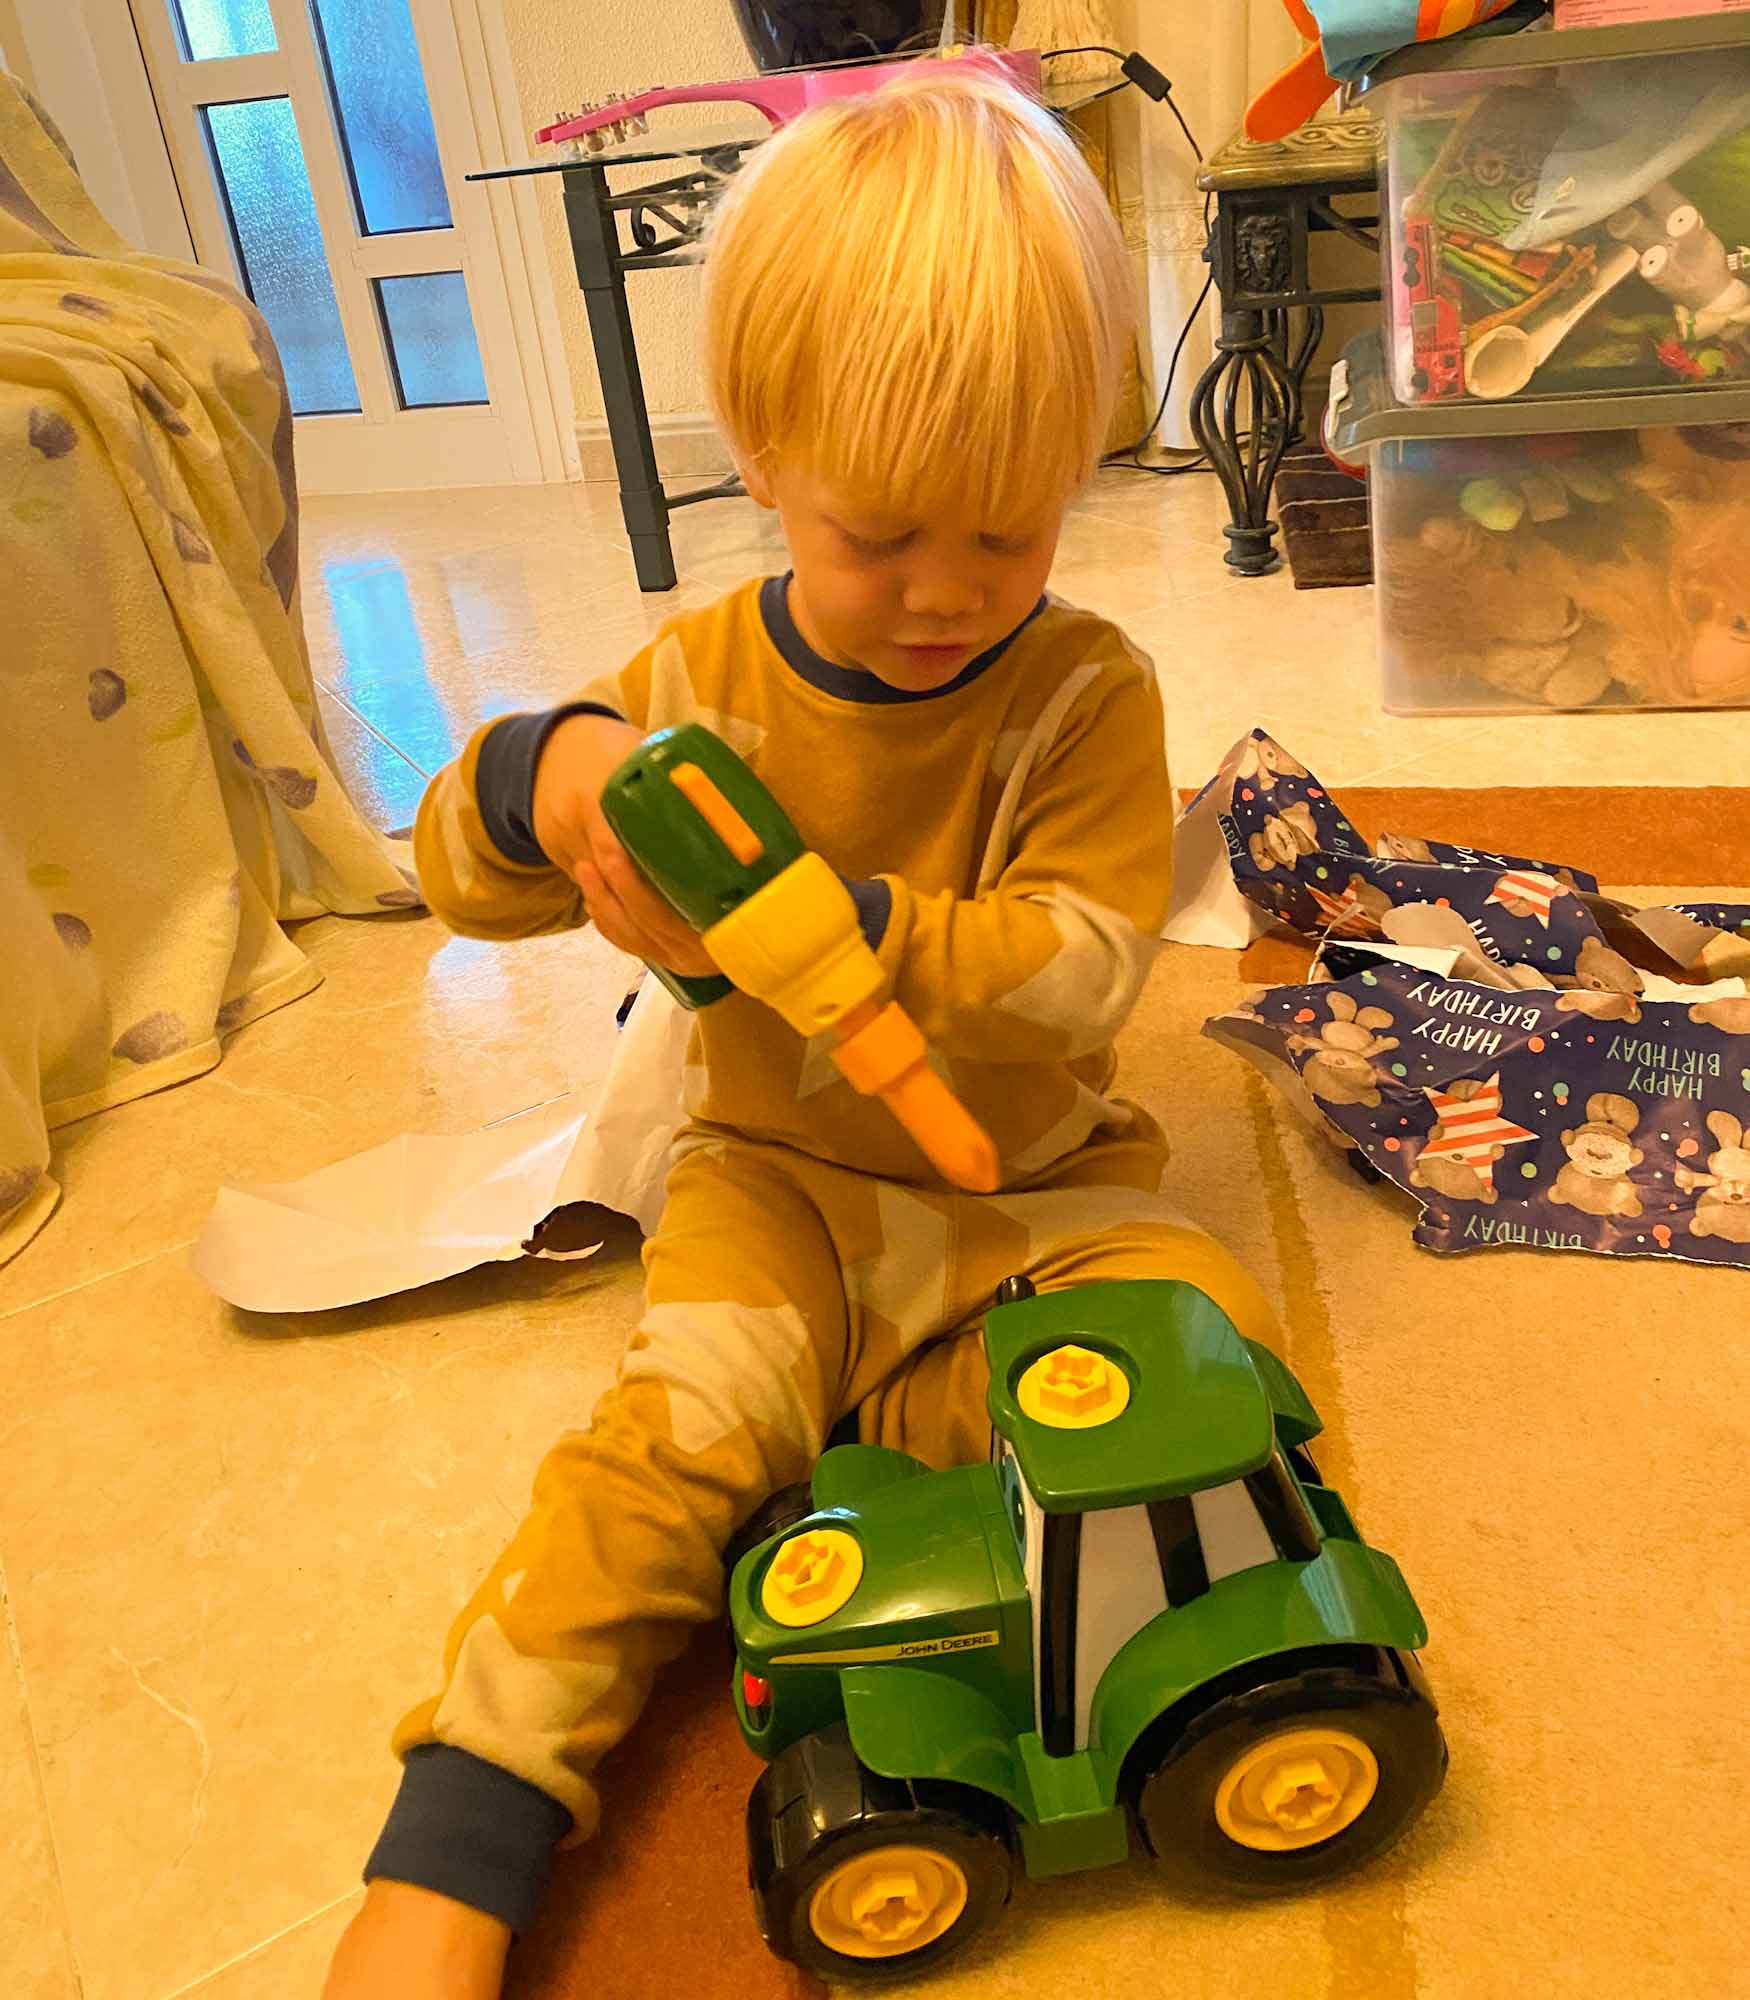 Young boy playing with a toy drill and tractor with ripped birthday wrapping paper behind